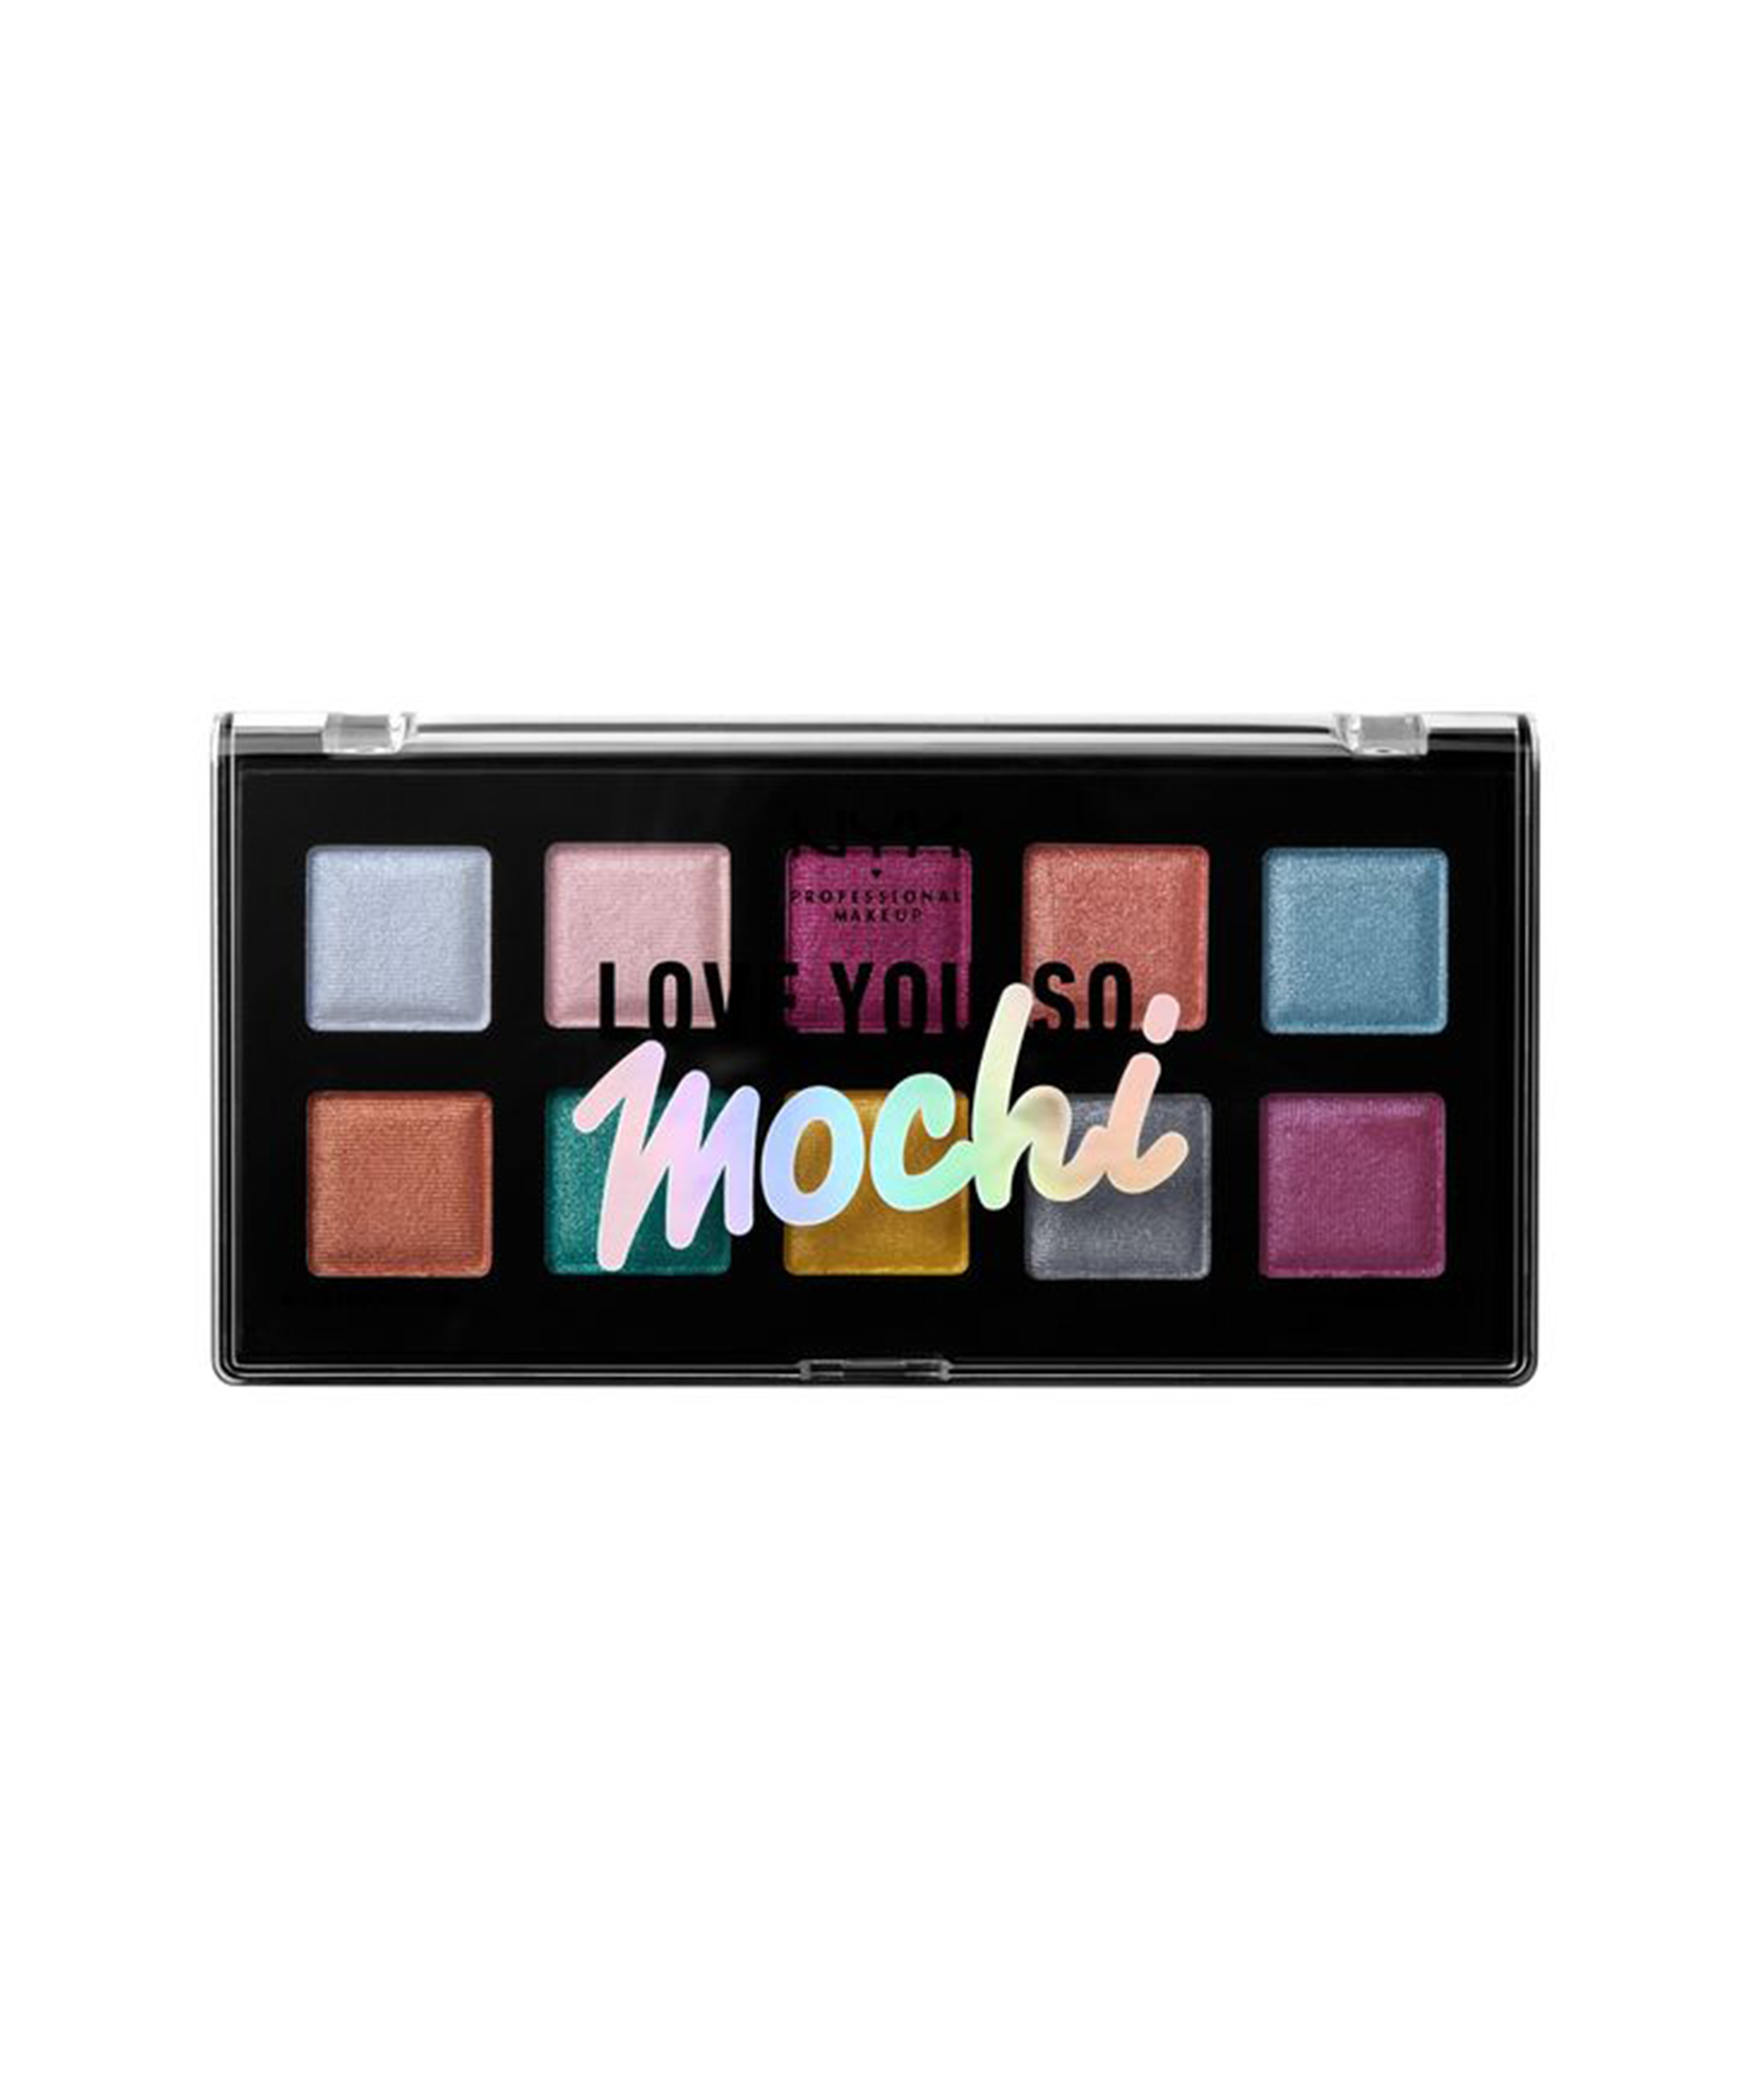 6 beauty palettes that will satisfy your holiday sweet tooth